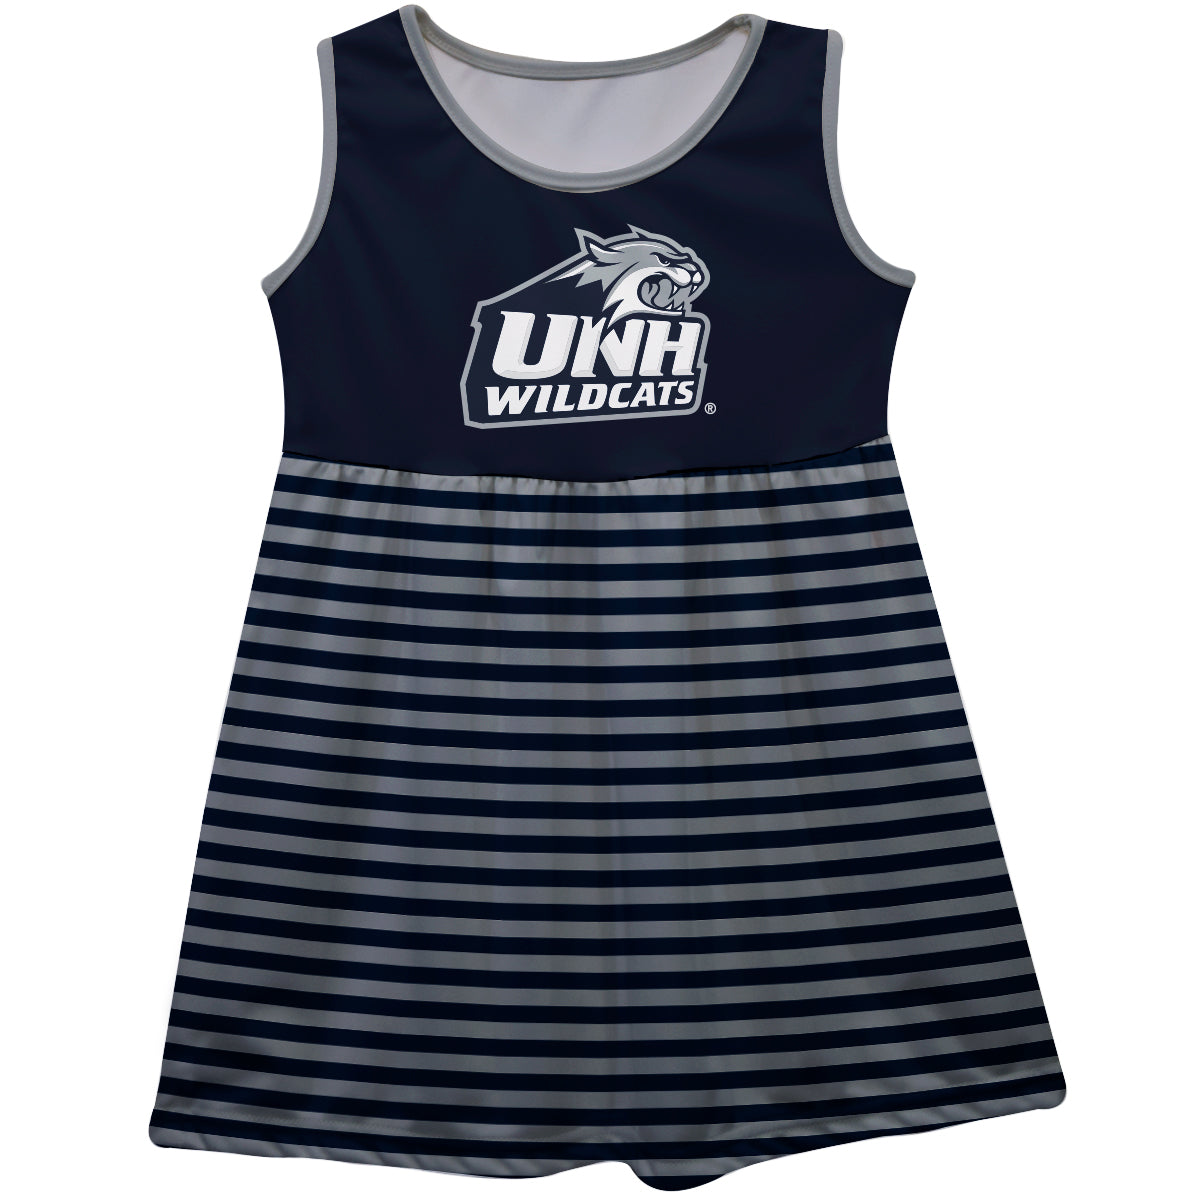 New Hampshire Wildcats UNH Girls Game Day Sleeveless Tank Dress Solid Navy Logo Stripes on Skirt by Vive La Fete-Campus-Wardrobe